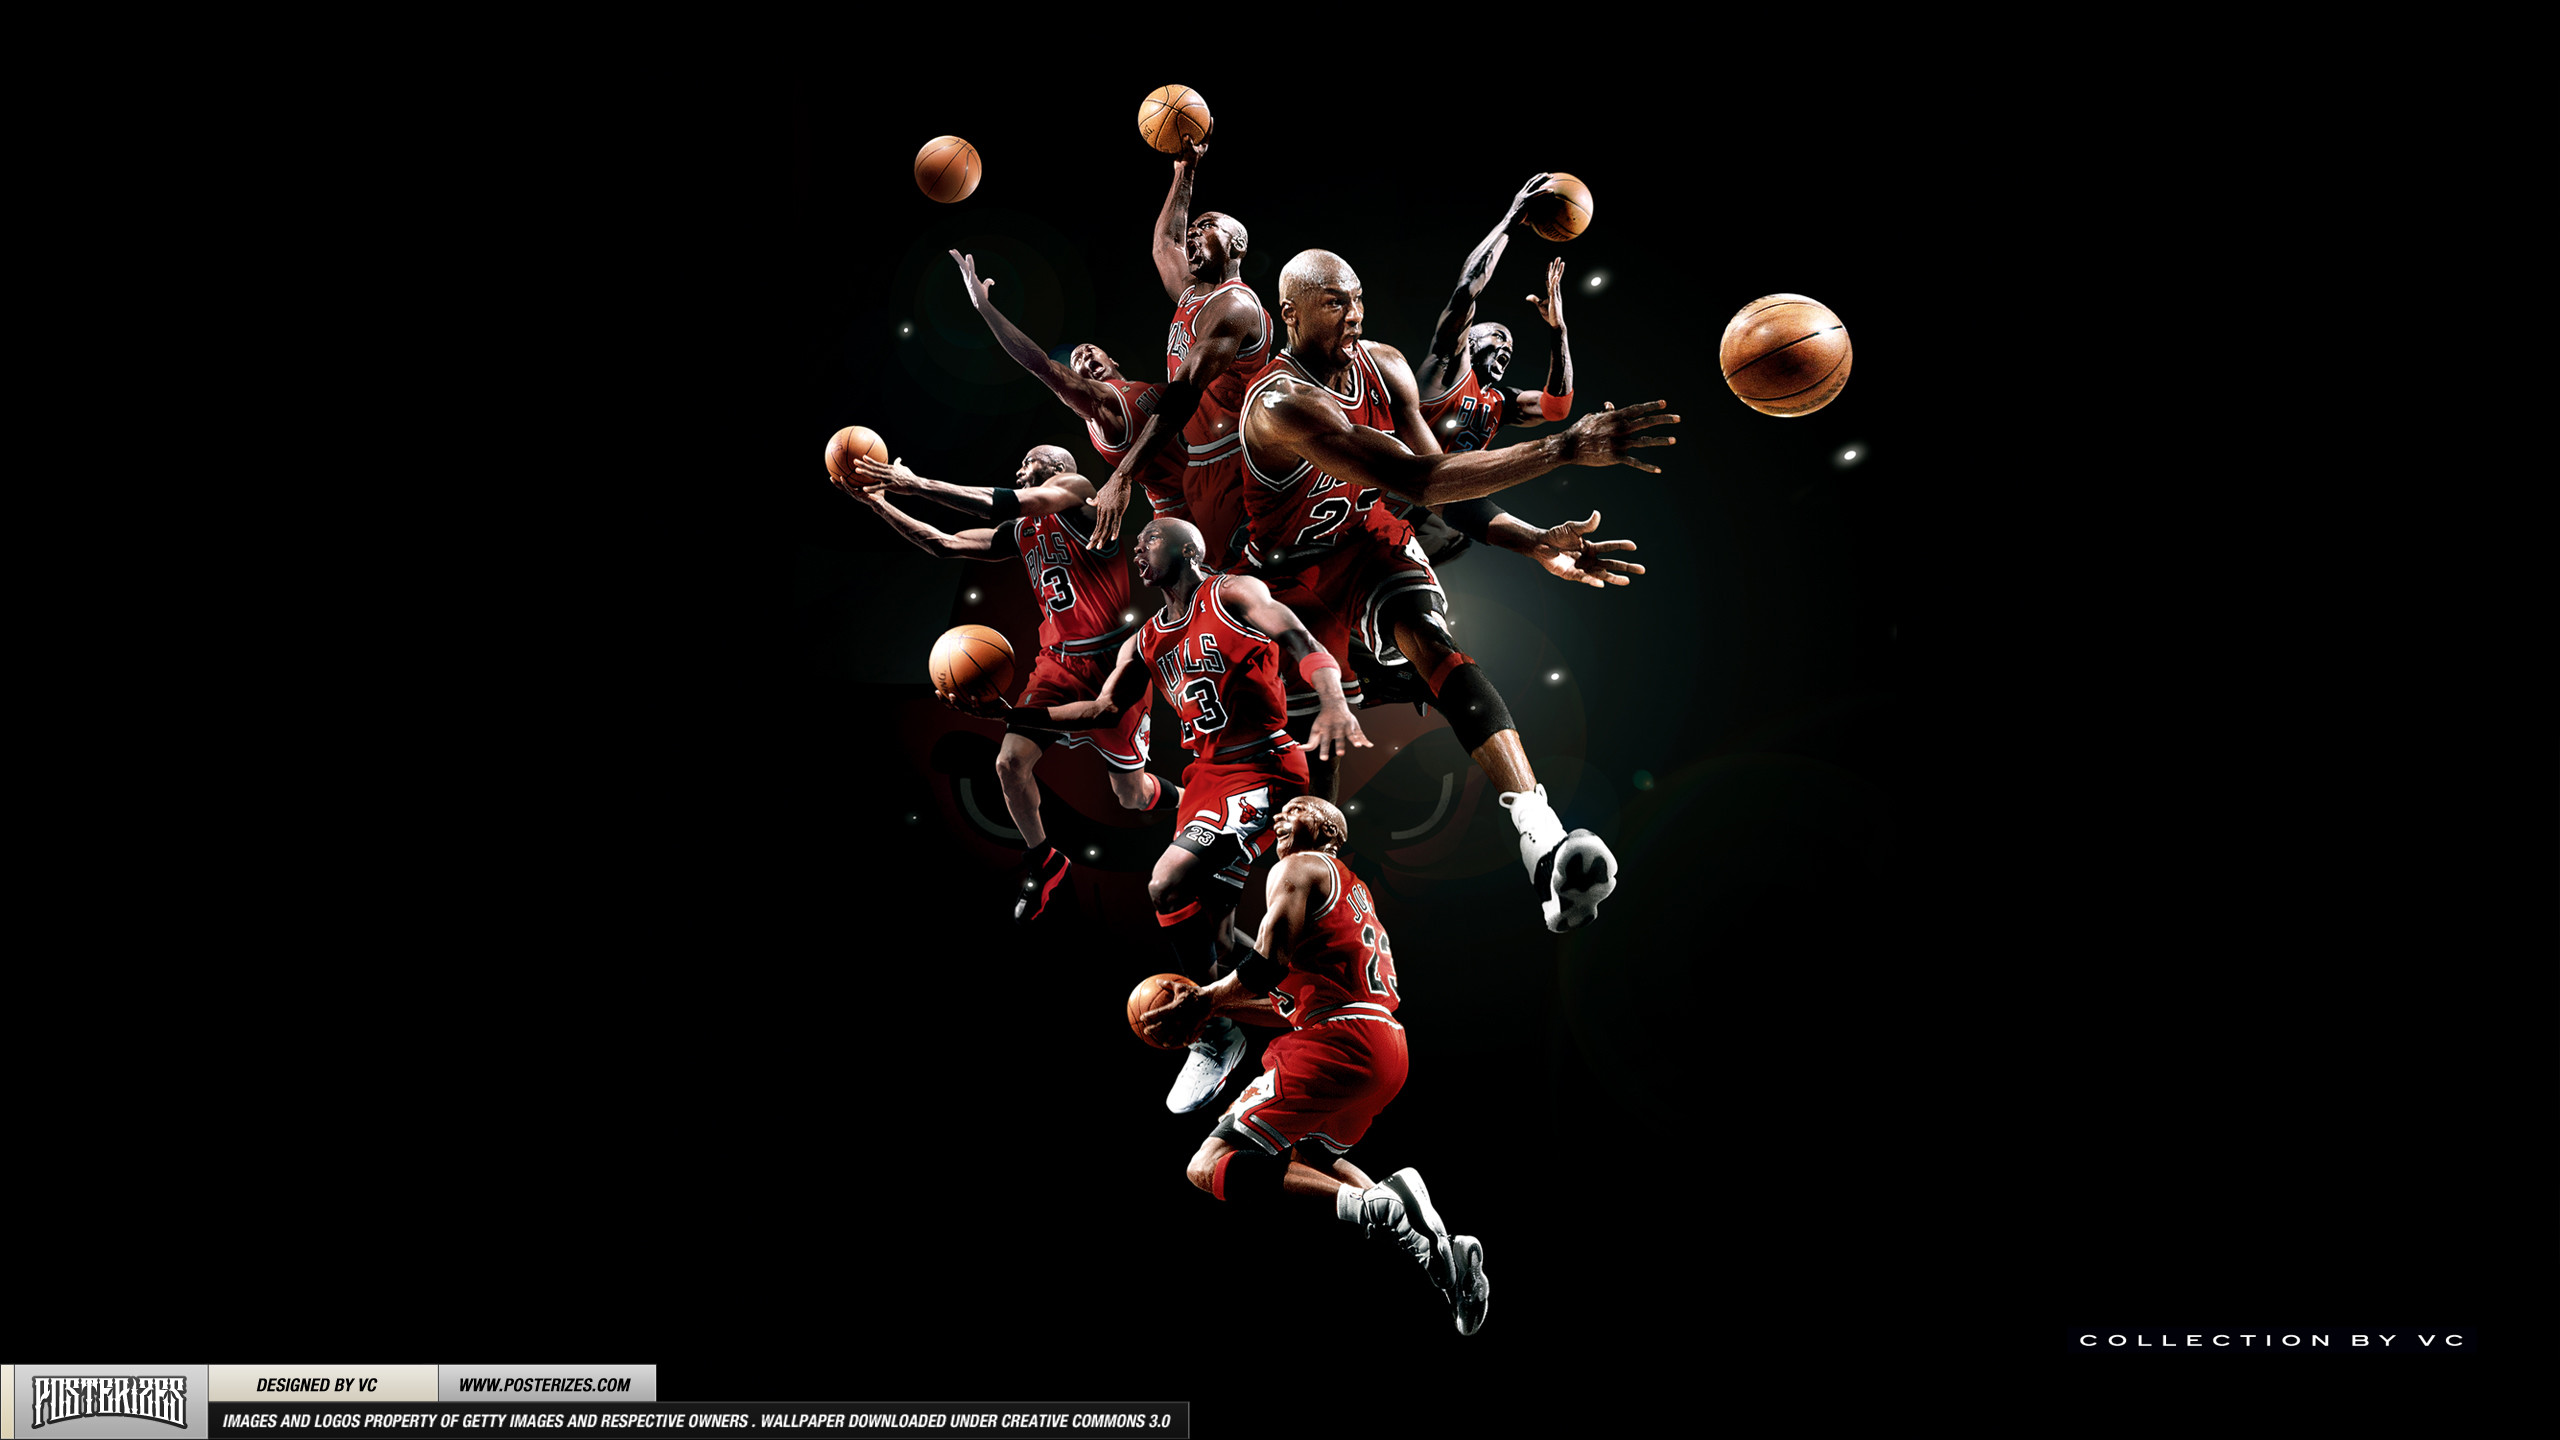 2560x1440 Michael Jordan Wallpapers High Resolution and Quality Download